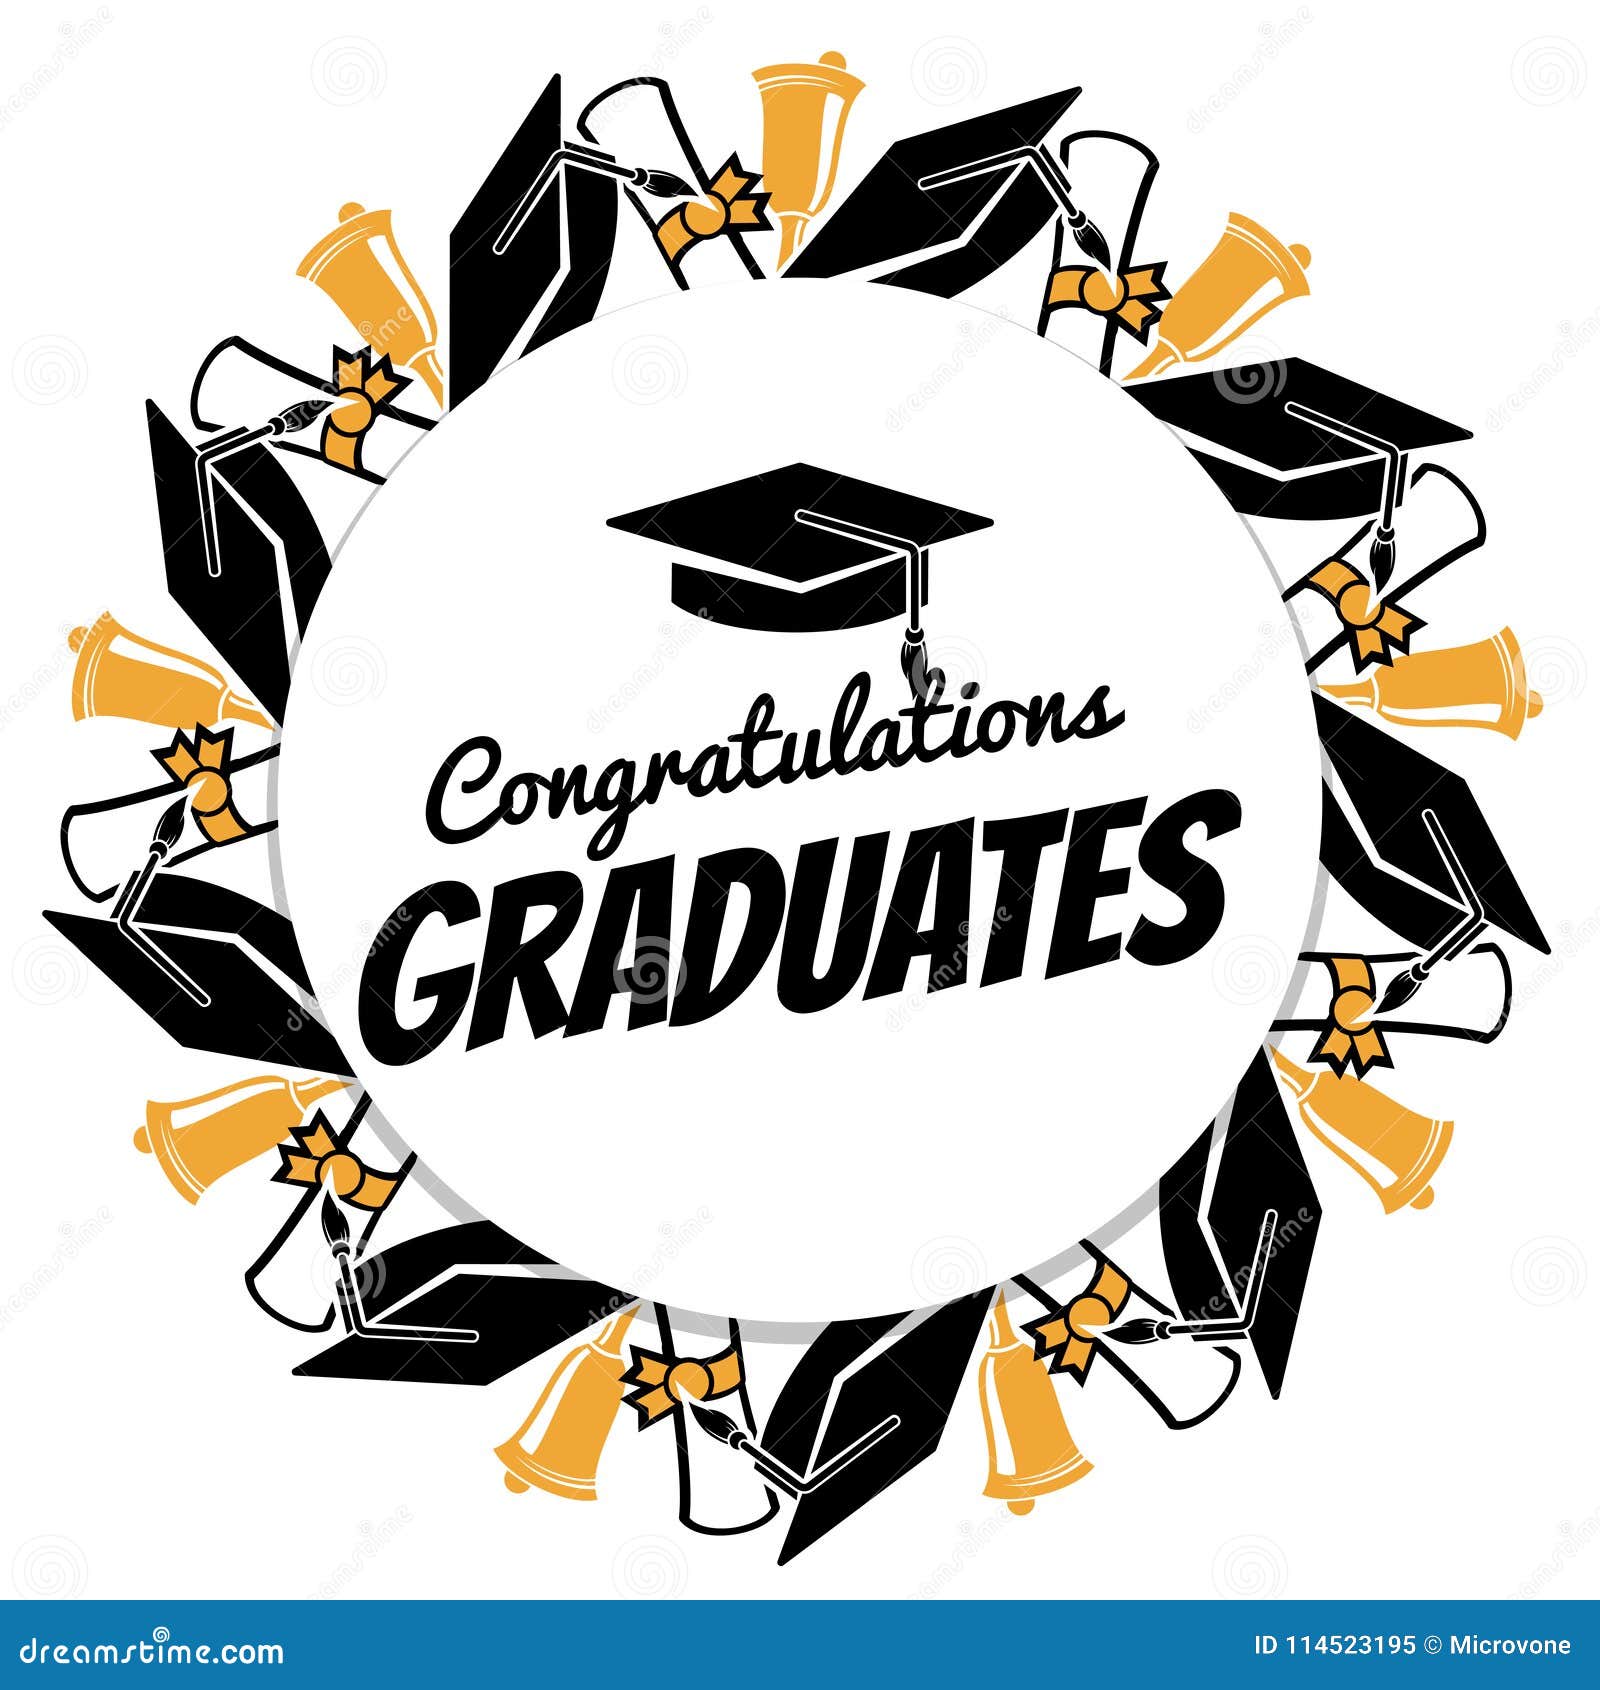 Congrats Graduates Round Banner With Students Accessorises Stock Vector